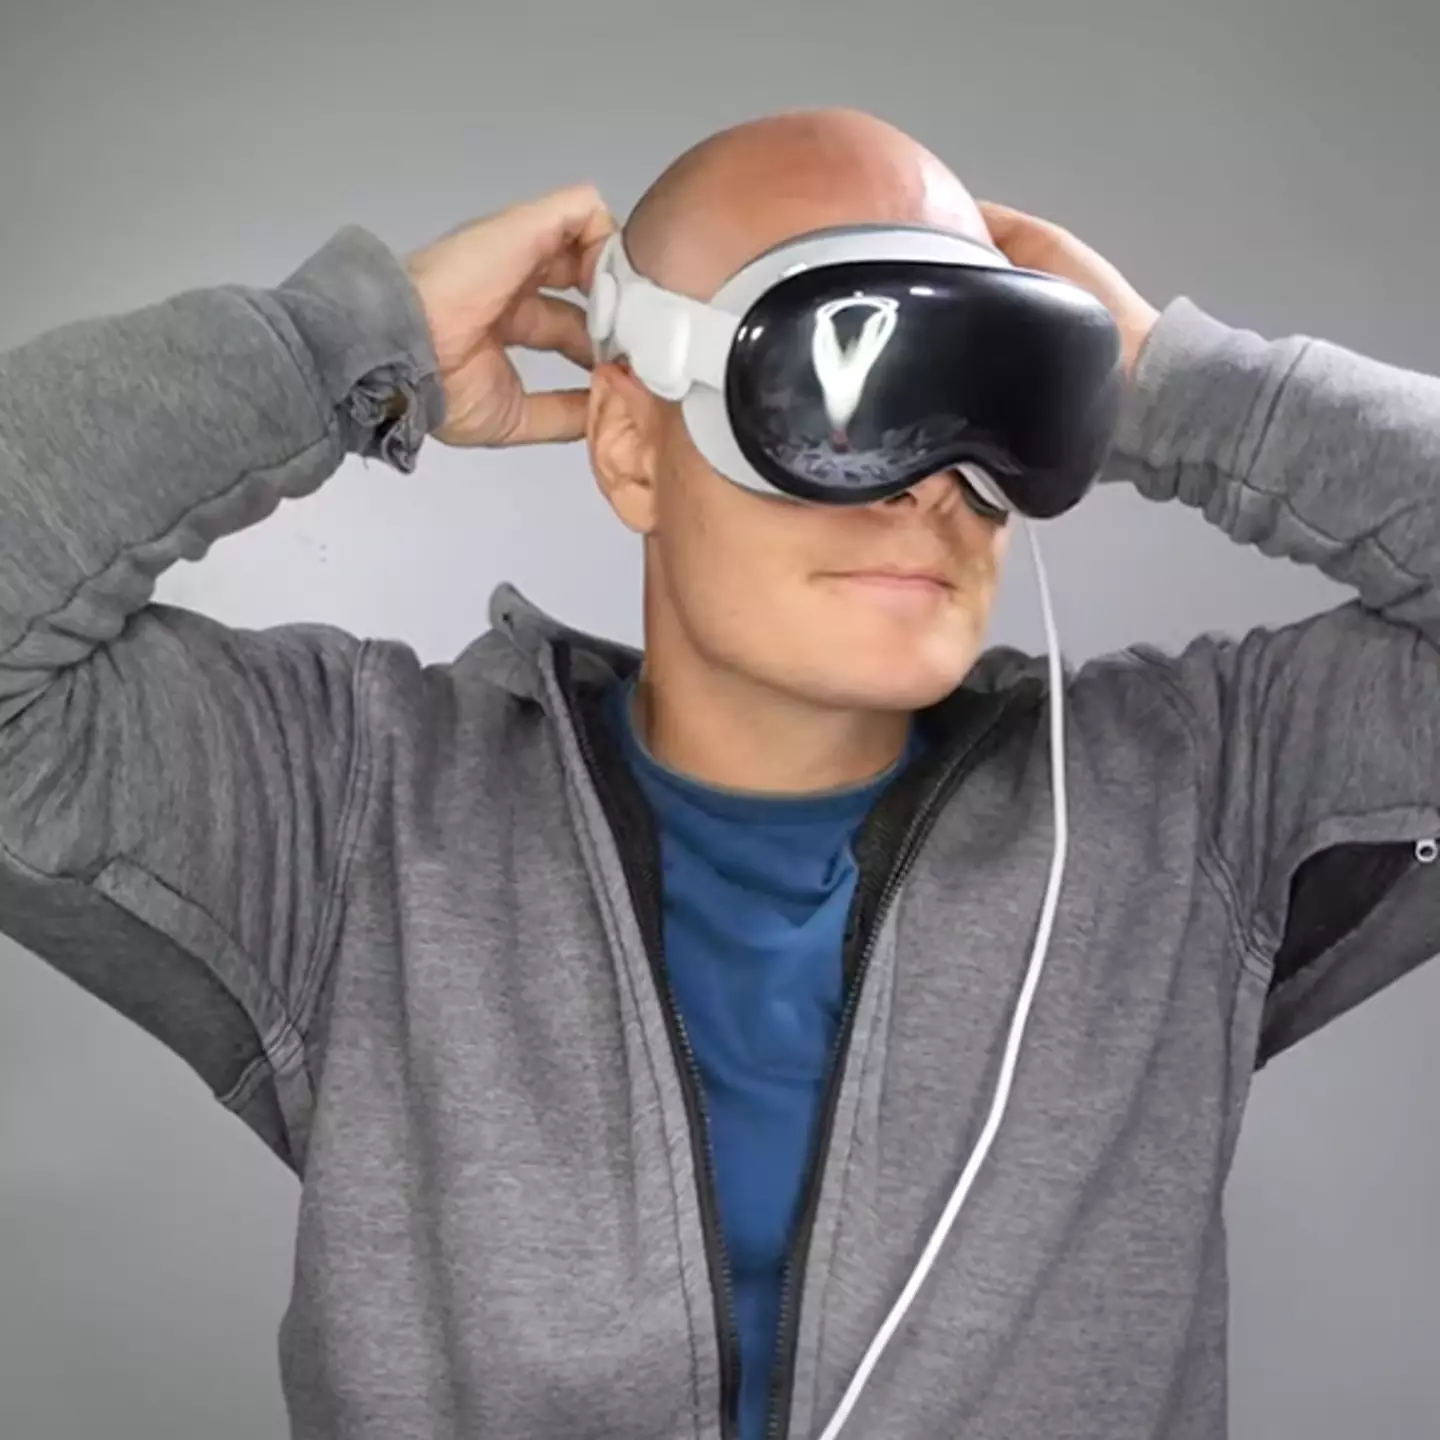 People are losing it after YouTuber ruins $3500 Apple Vision Pro headset with scalpel